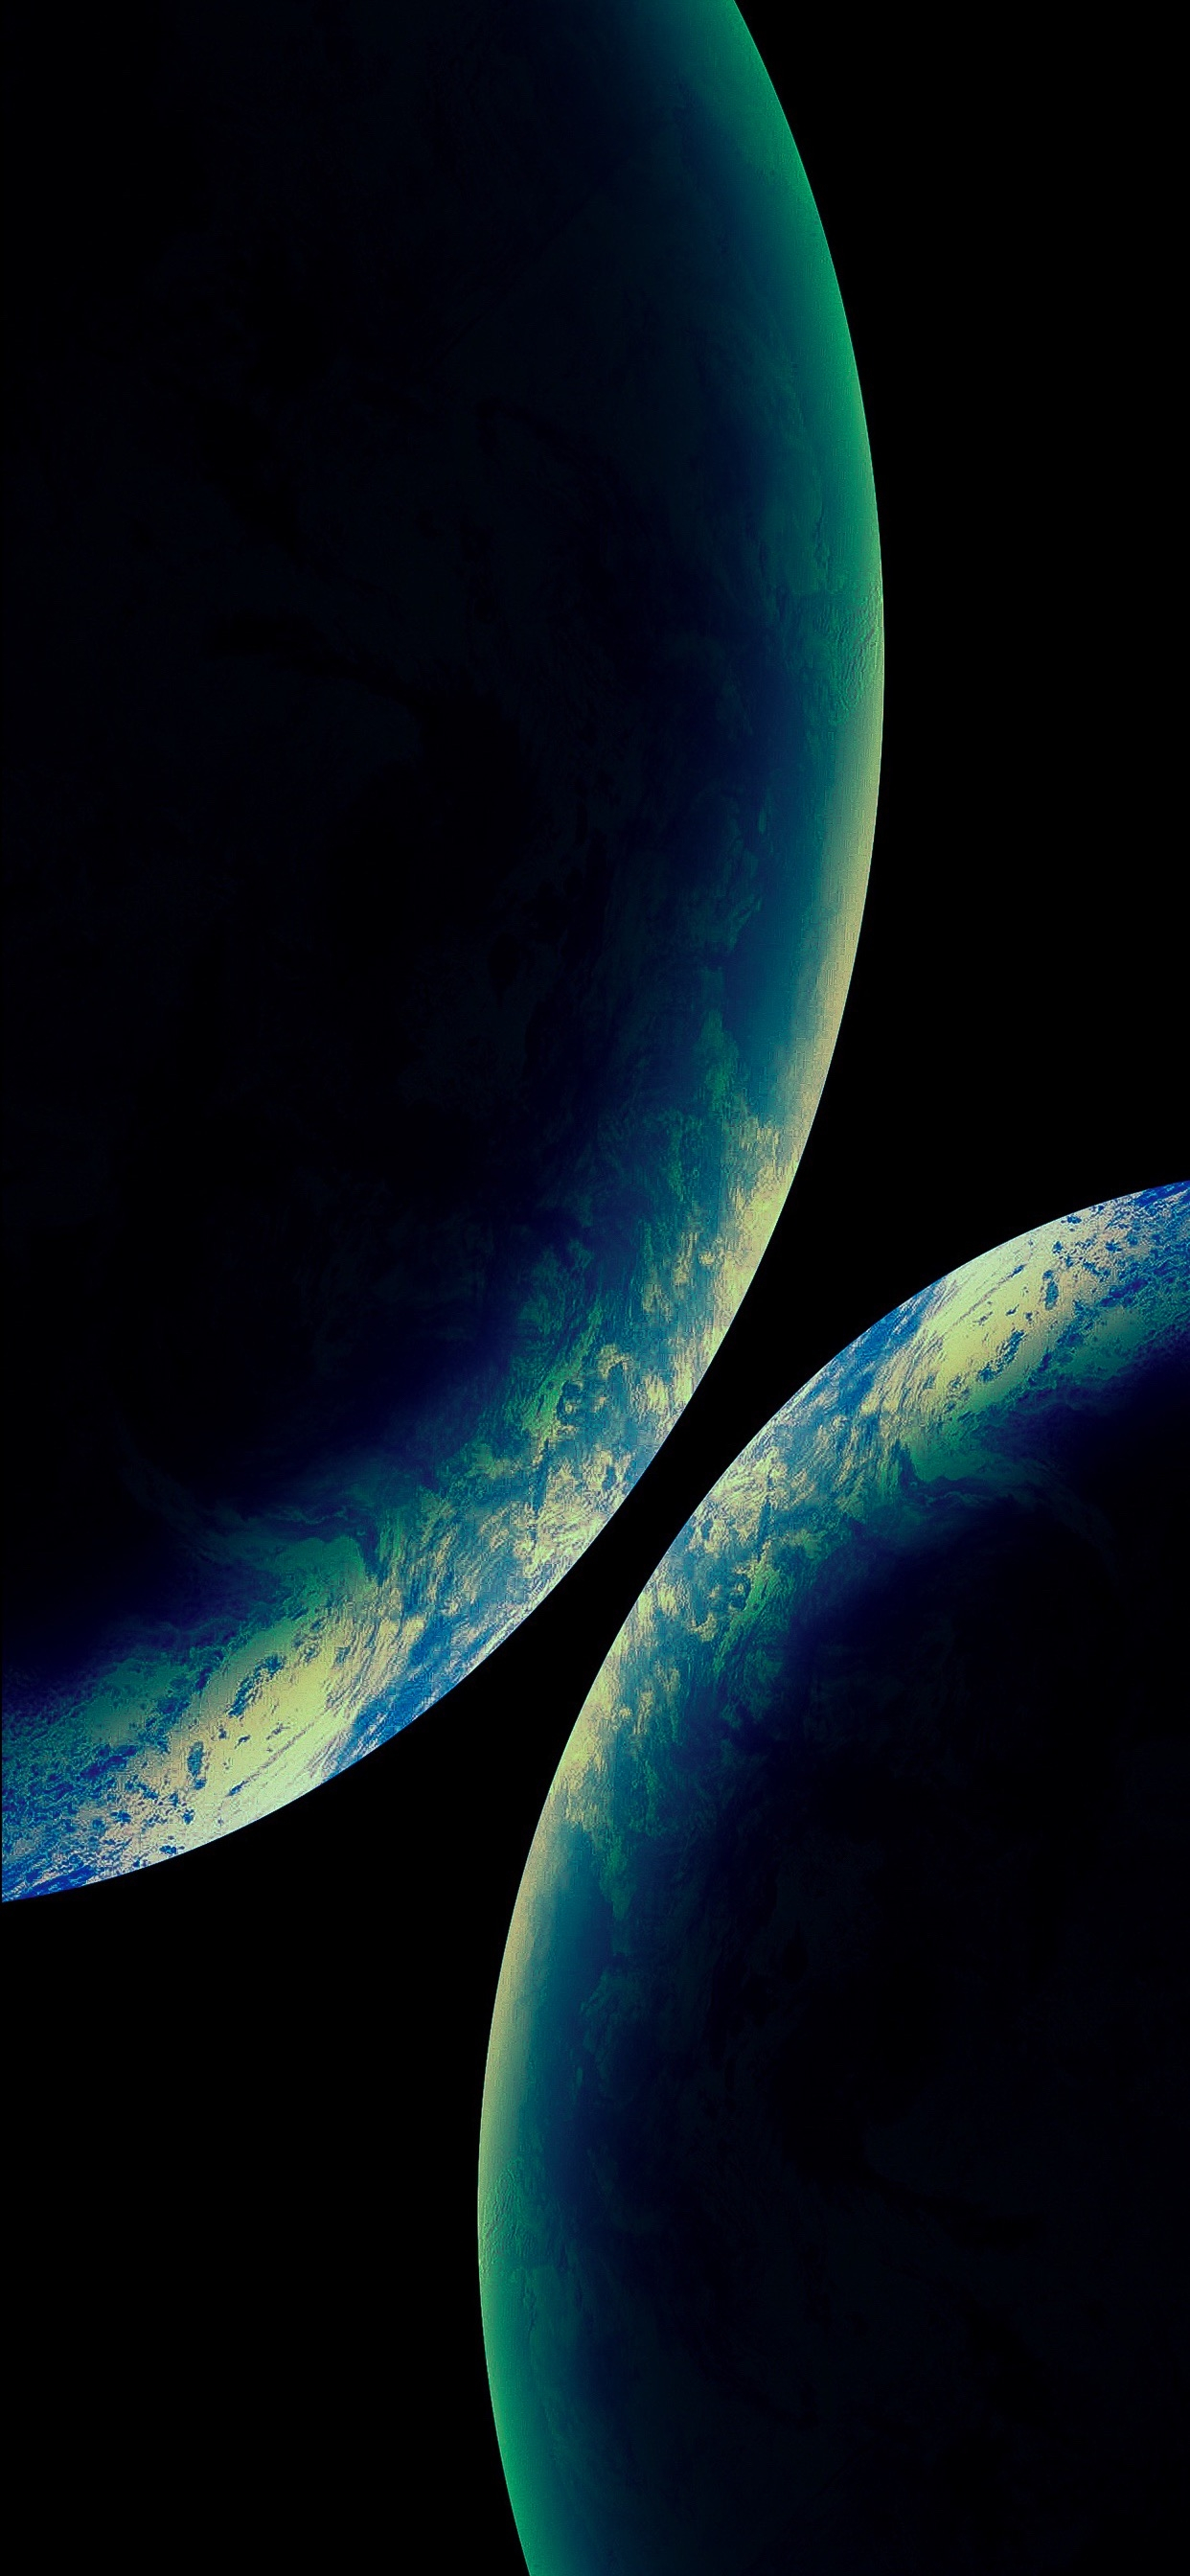 1242x2688 Wallpapers of the week: fantasy planets